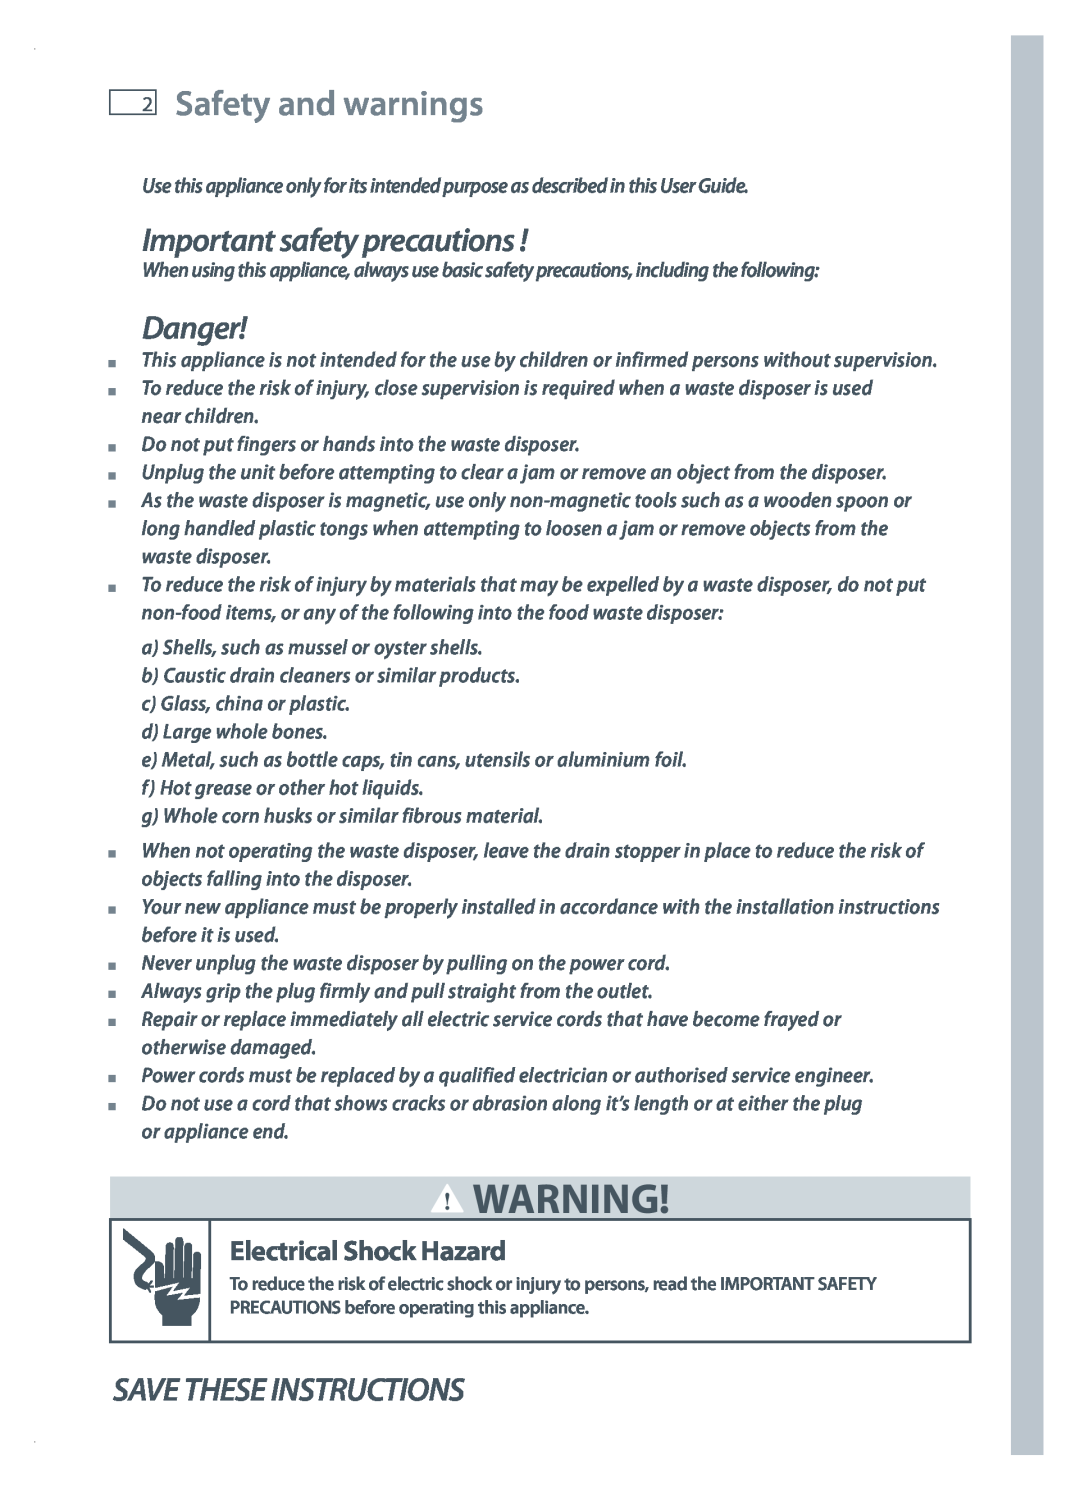 Fisher & Paykel GD50S1 Safety and warnings, Important safety precautions, Danger, Save These Instructions 